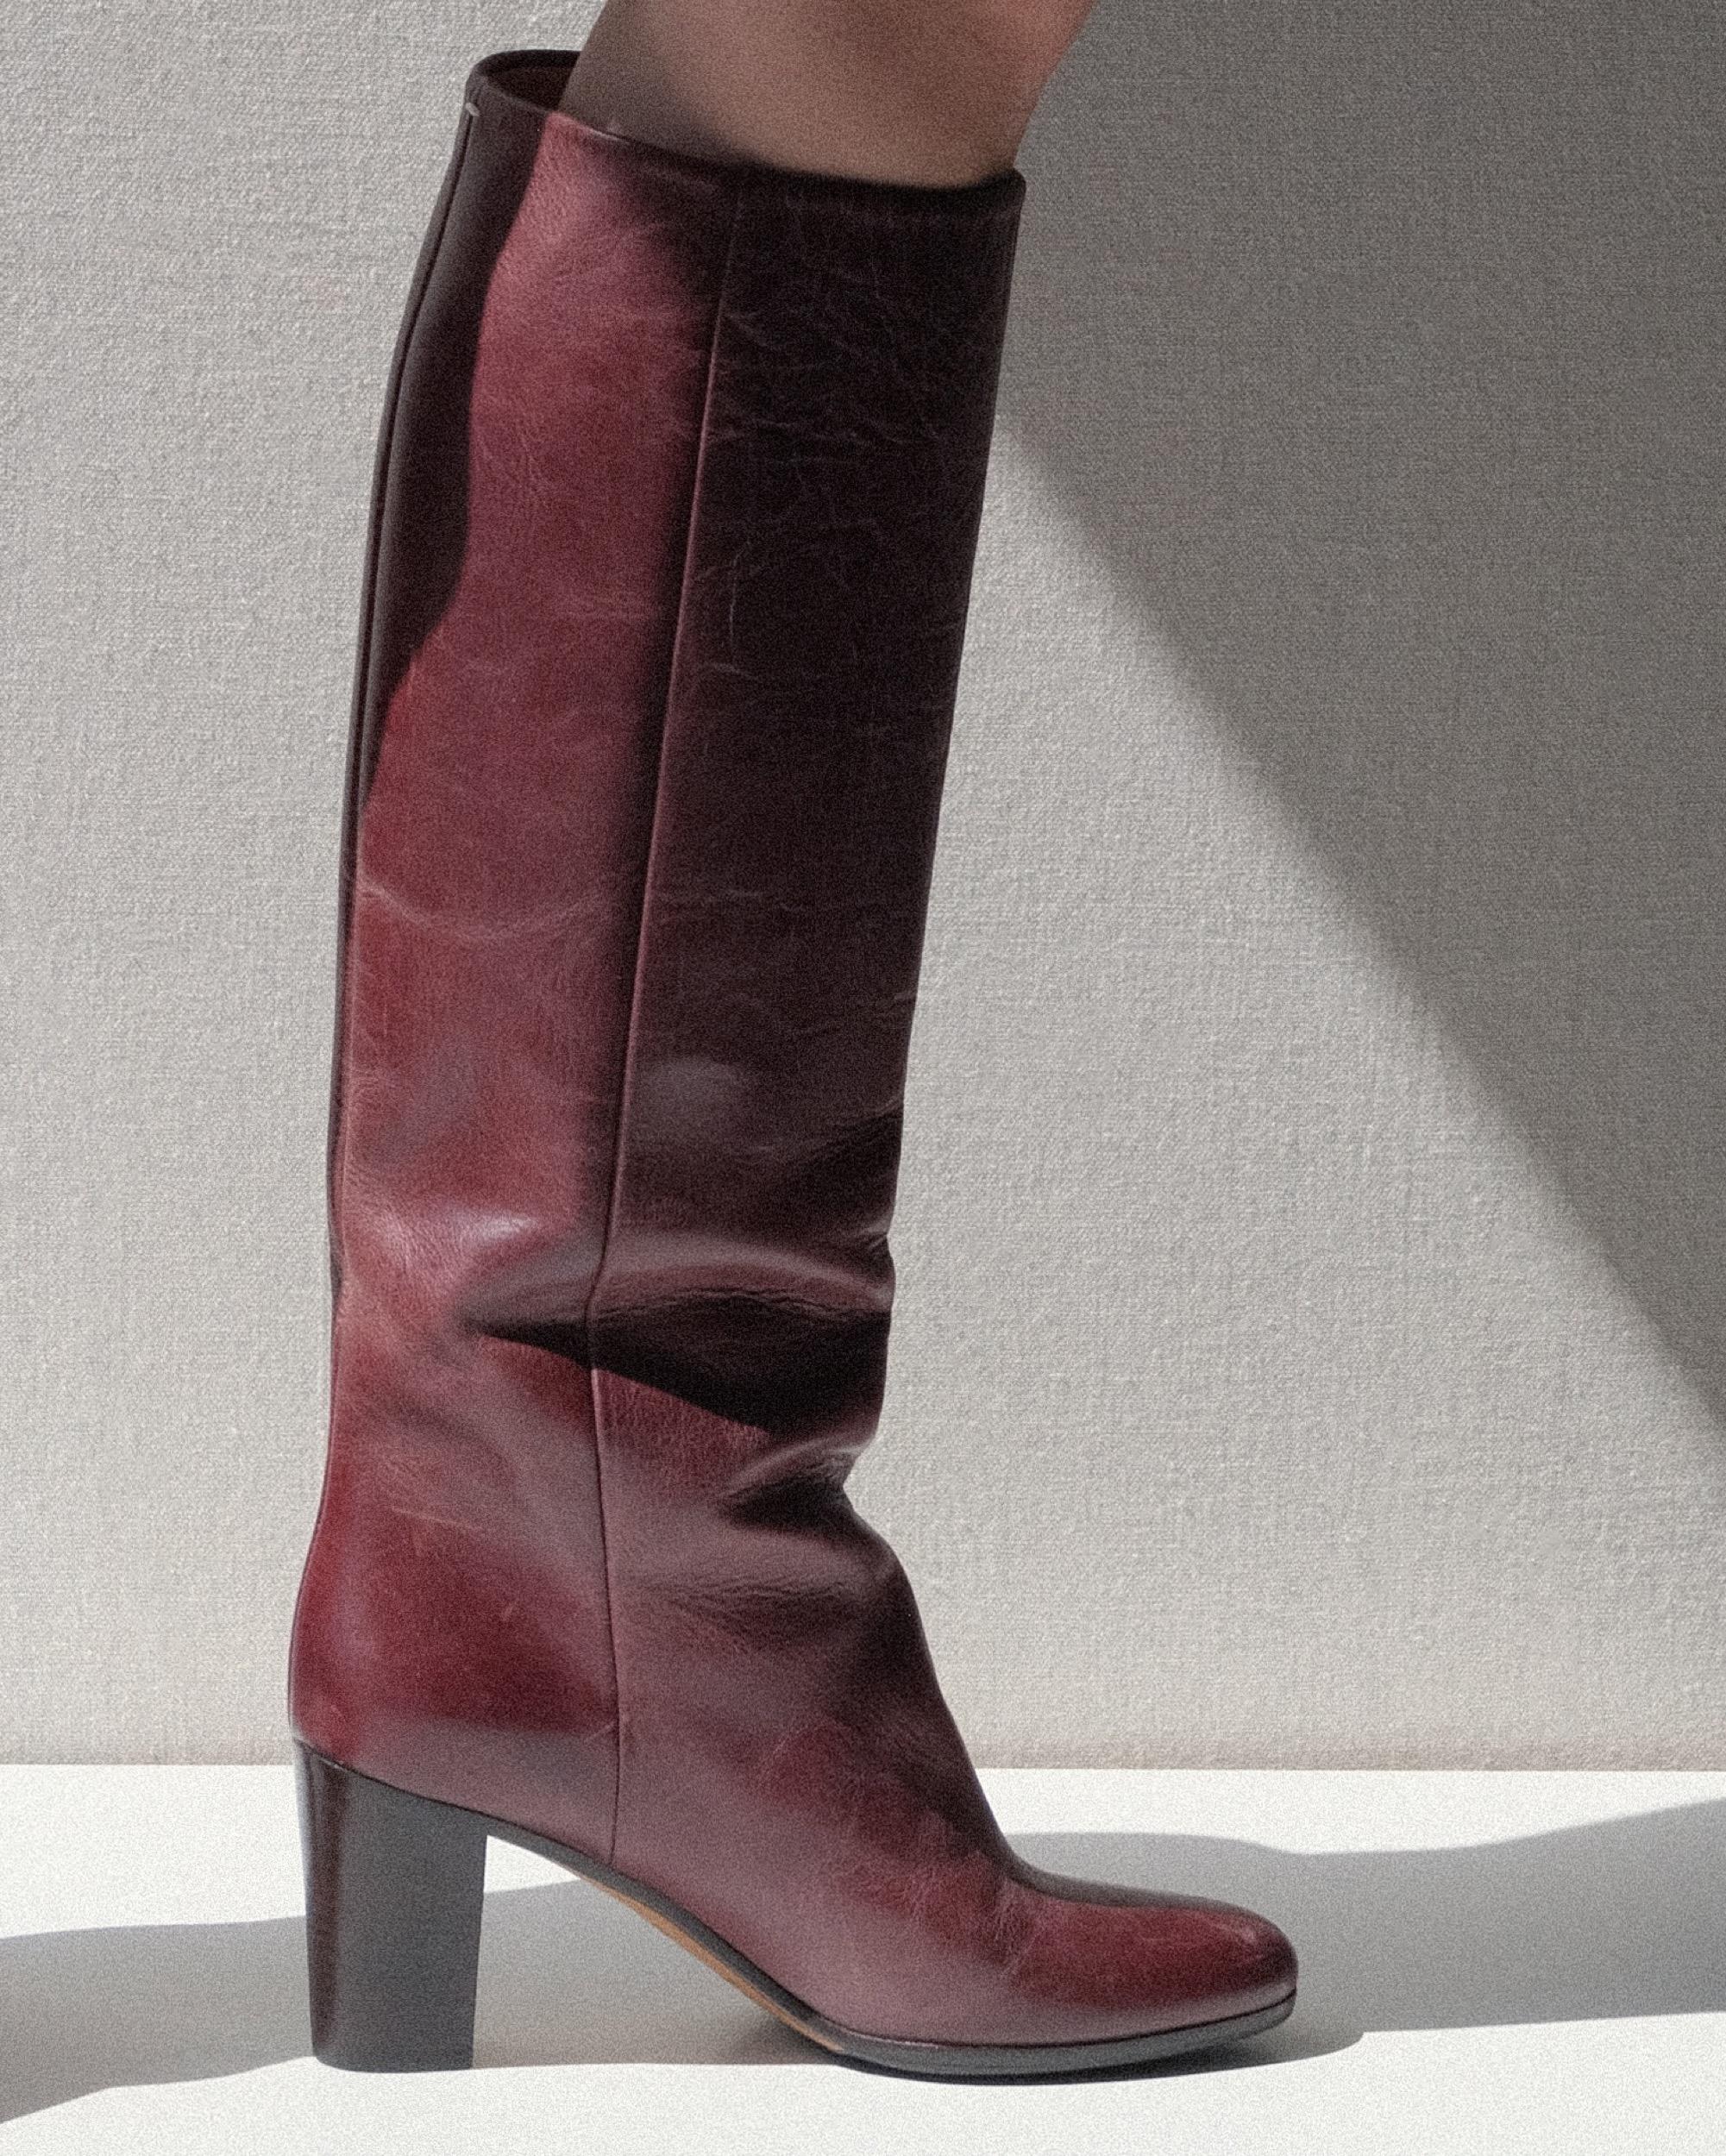 Martin Margiela Riding Boots Deep Red Size 37 Replica Line 22 For Sale 4